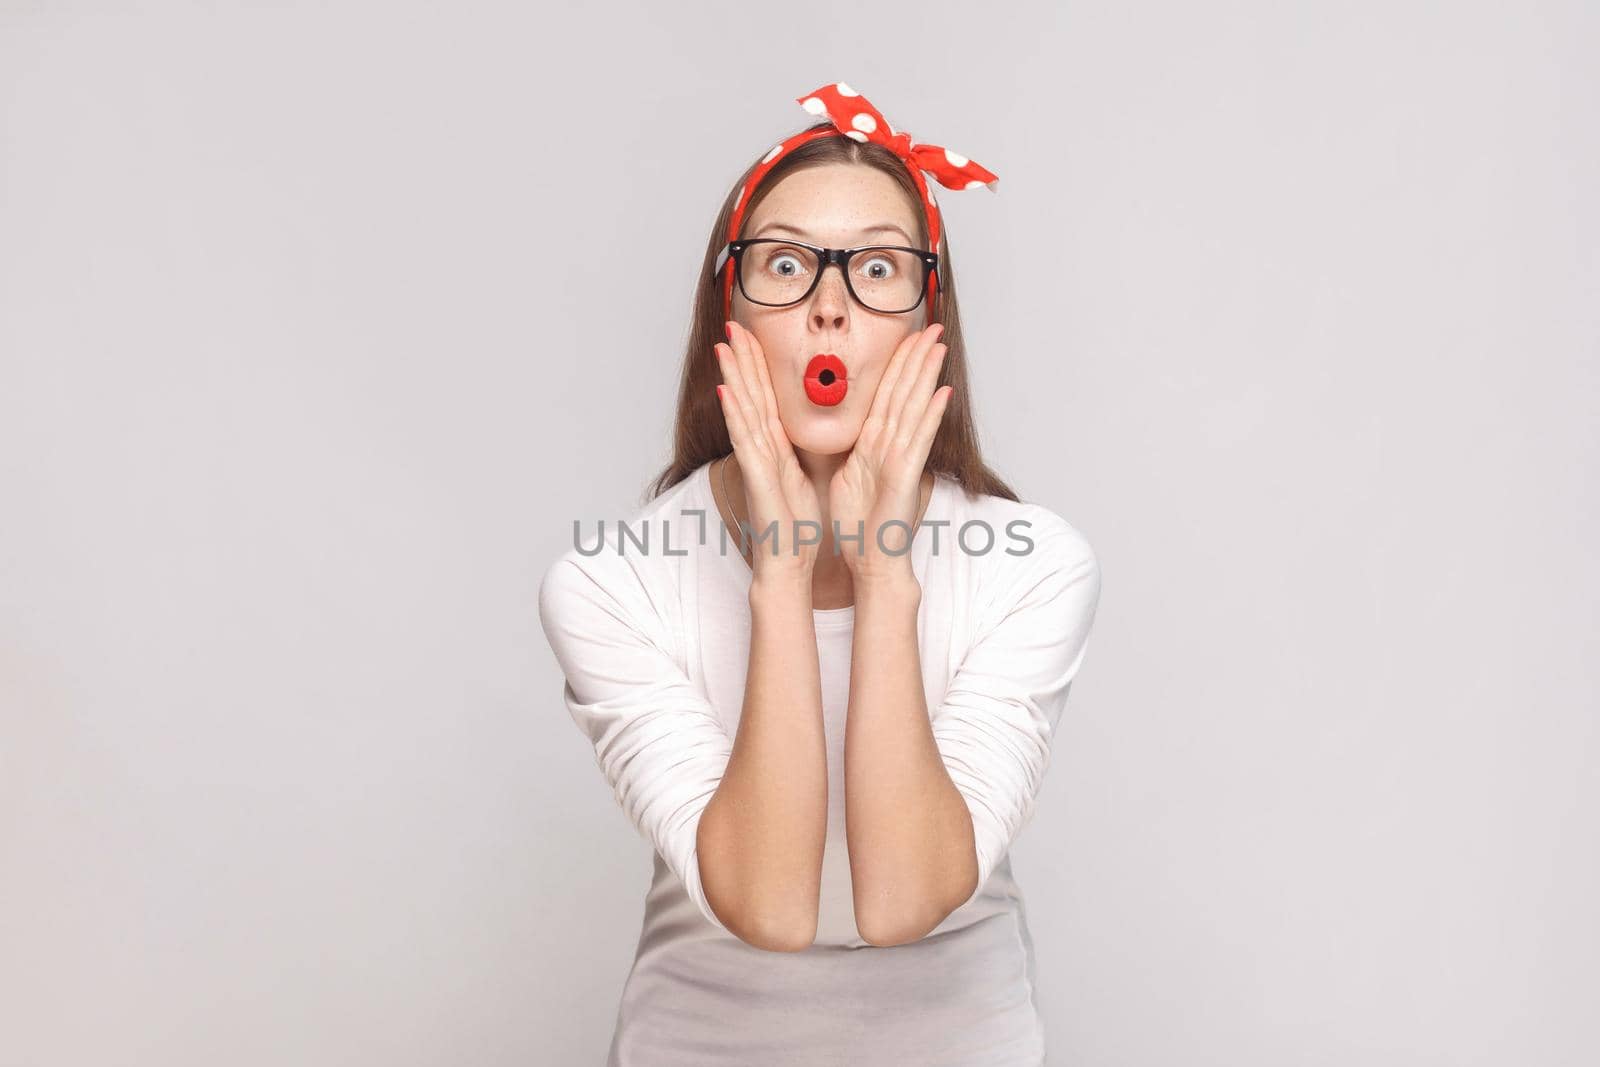 surprised big eyes portrait of beautiful emotional young woman in white t-shirt with freckles, black glasses, red lips and head band. indoor studio shot, isolated on light gray background.